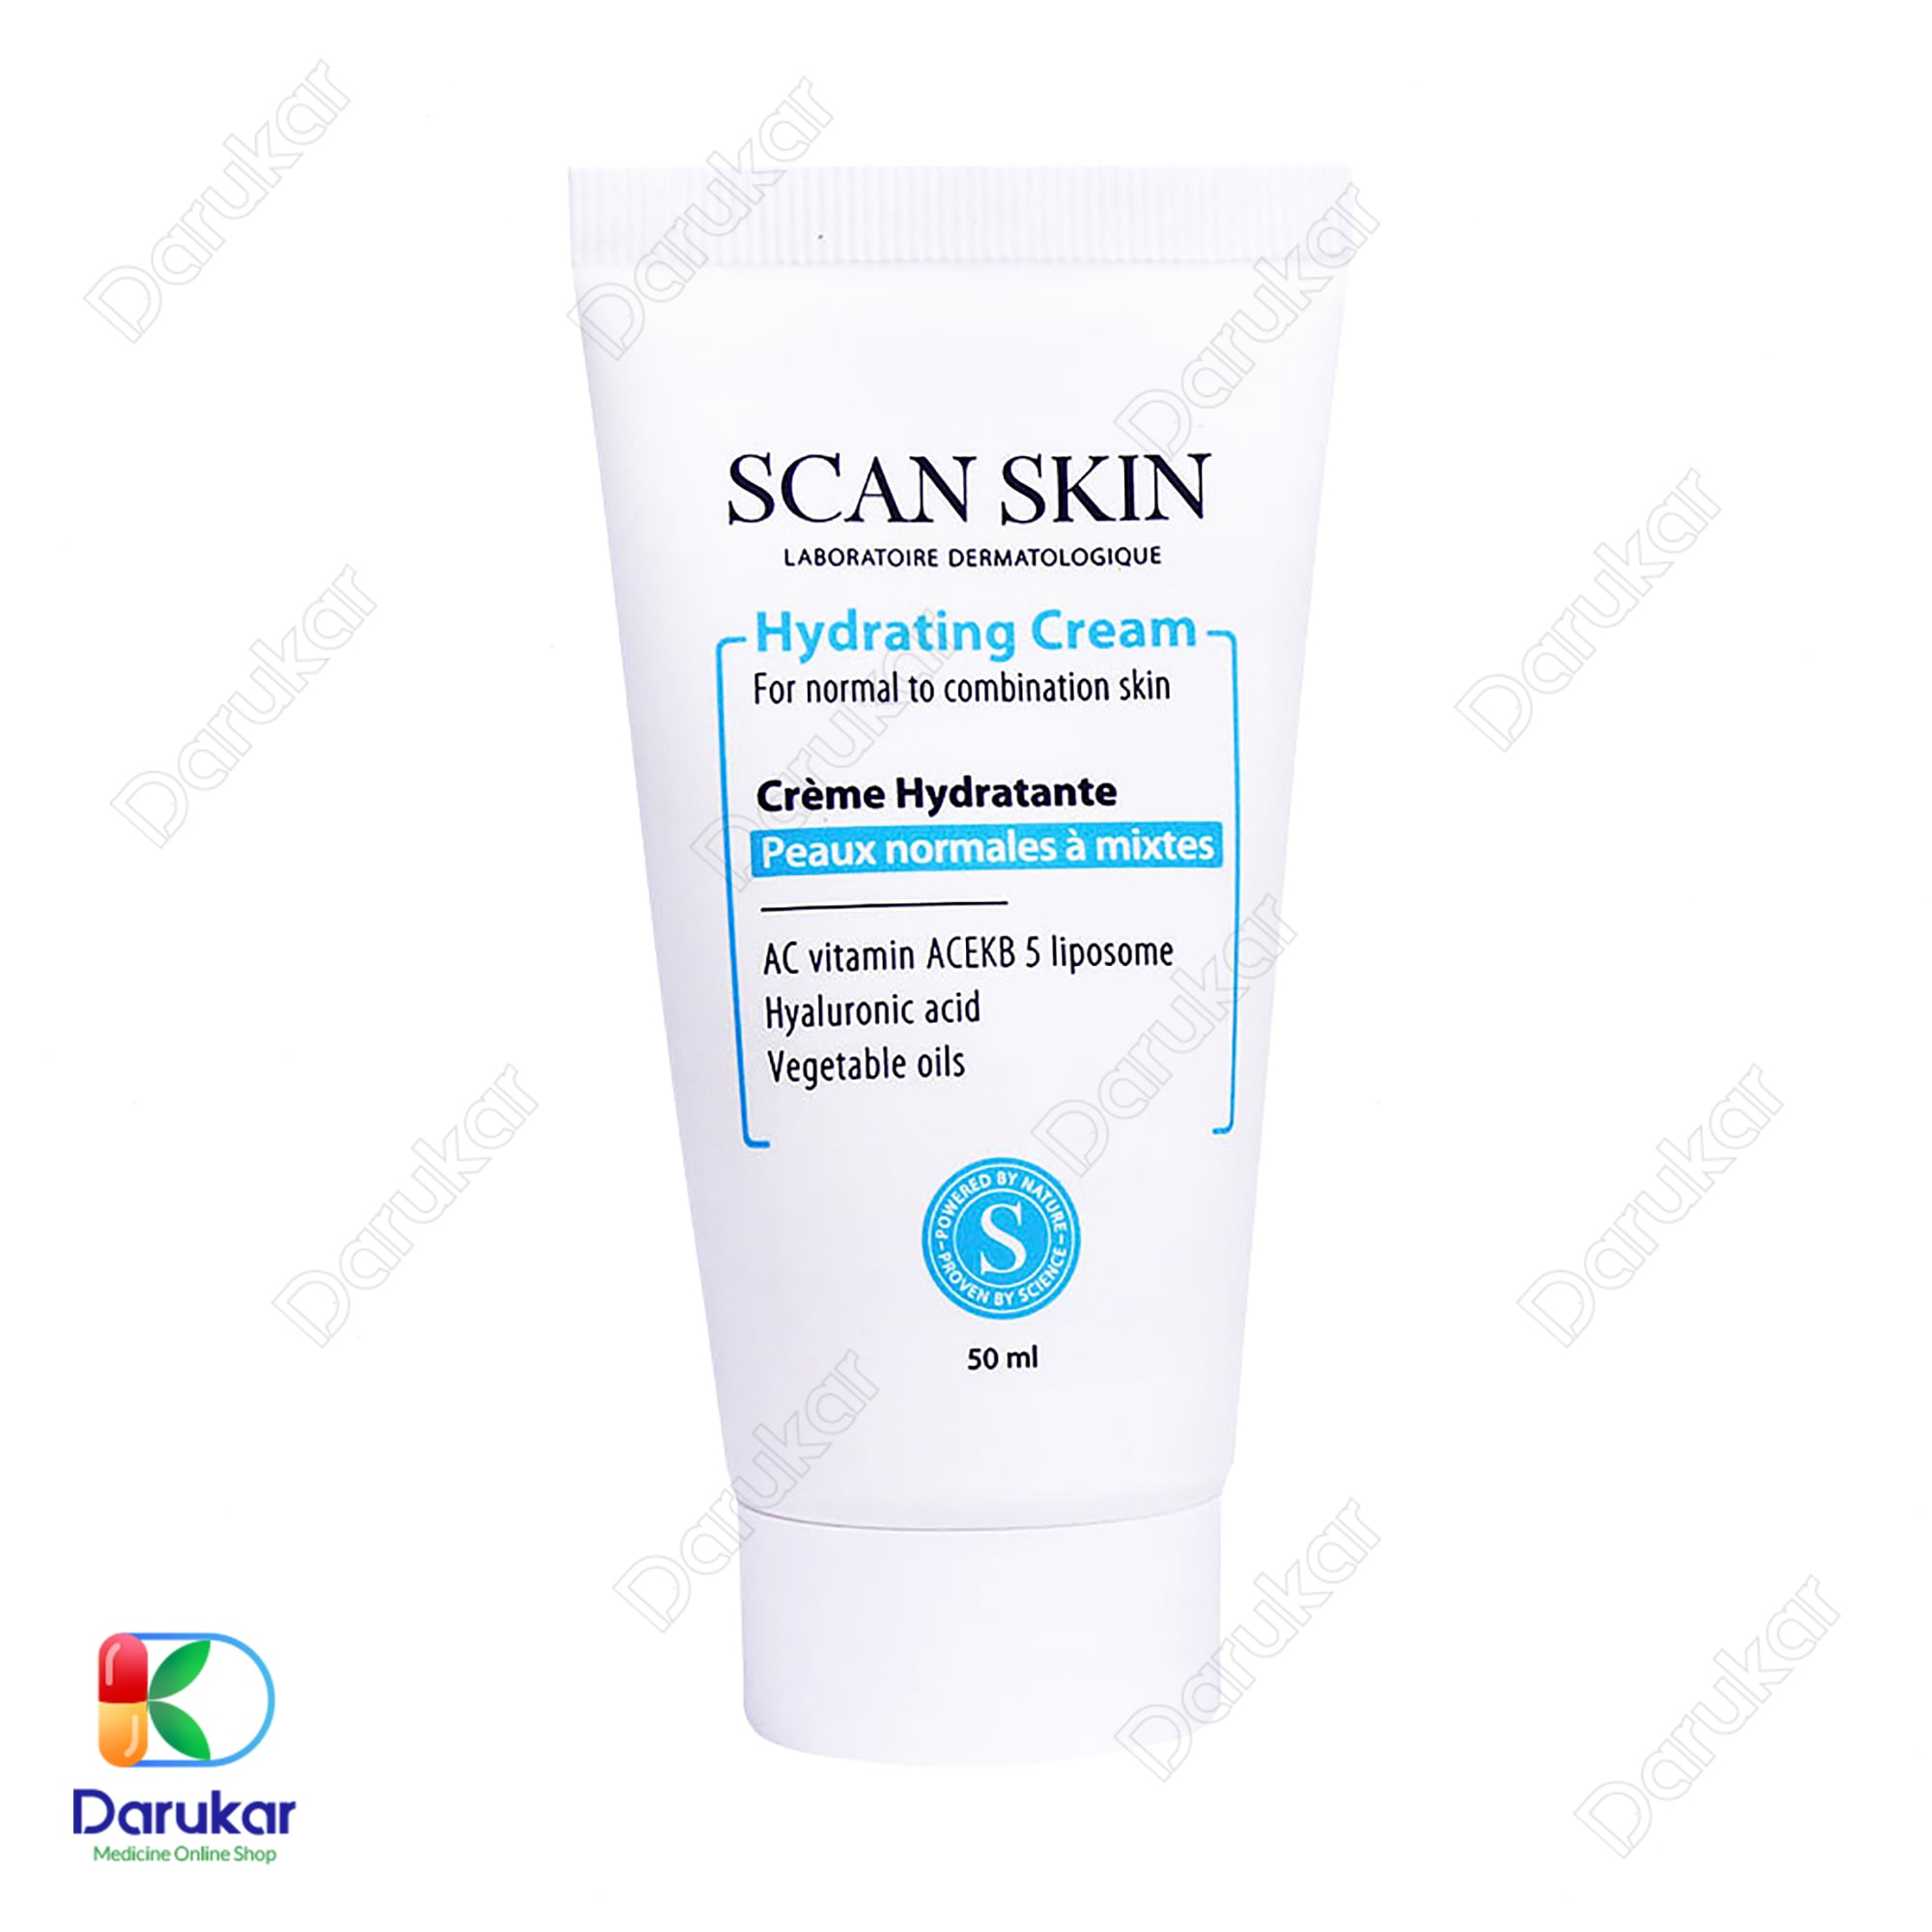 Scan Skin Hydration Cream For Normal to Combination Skin 50 ml 1